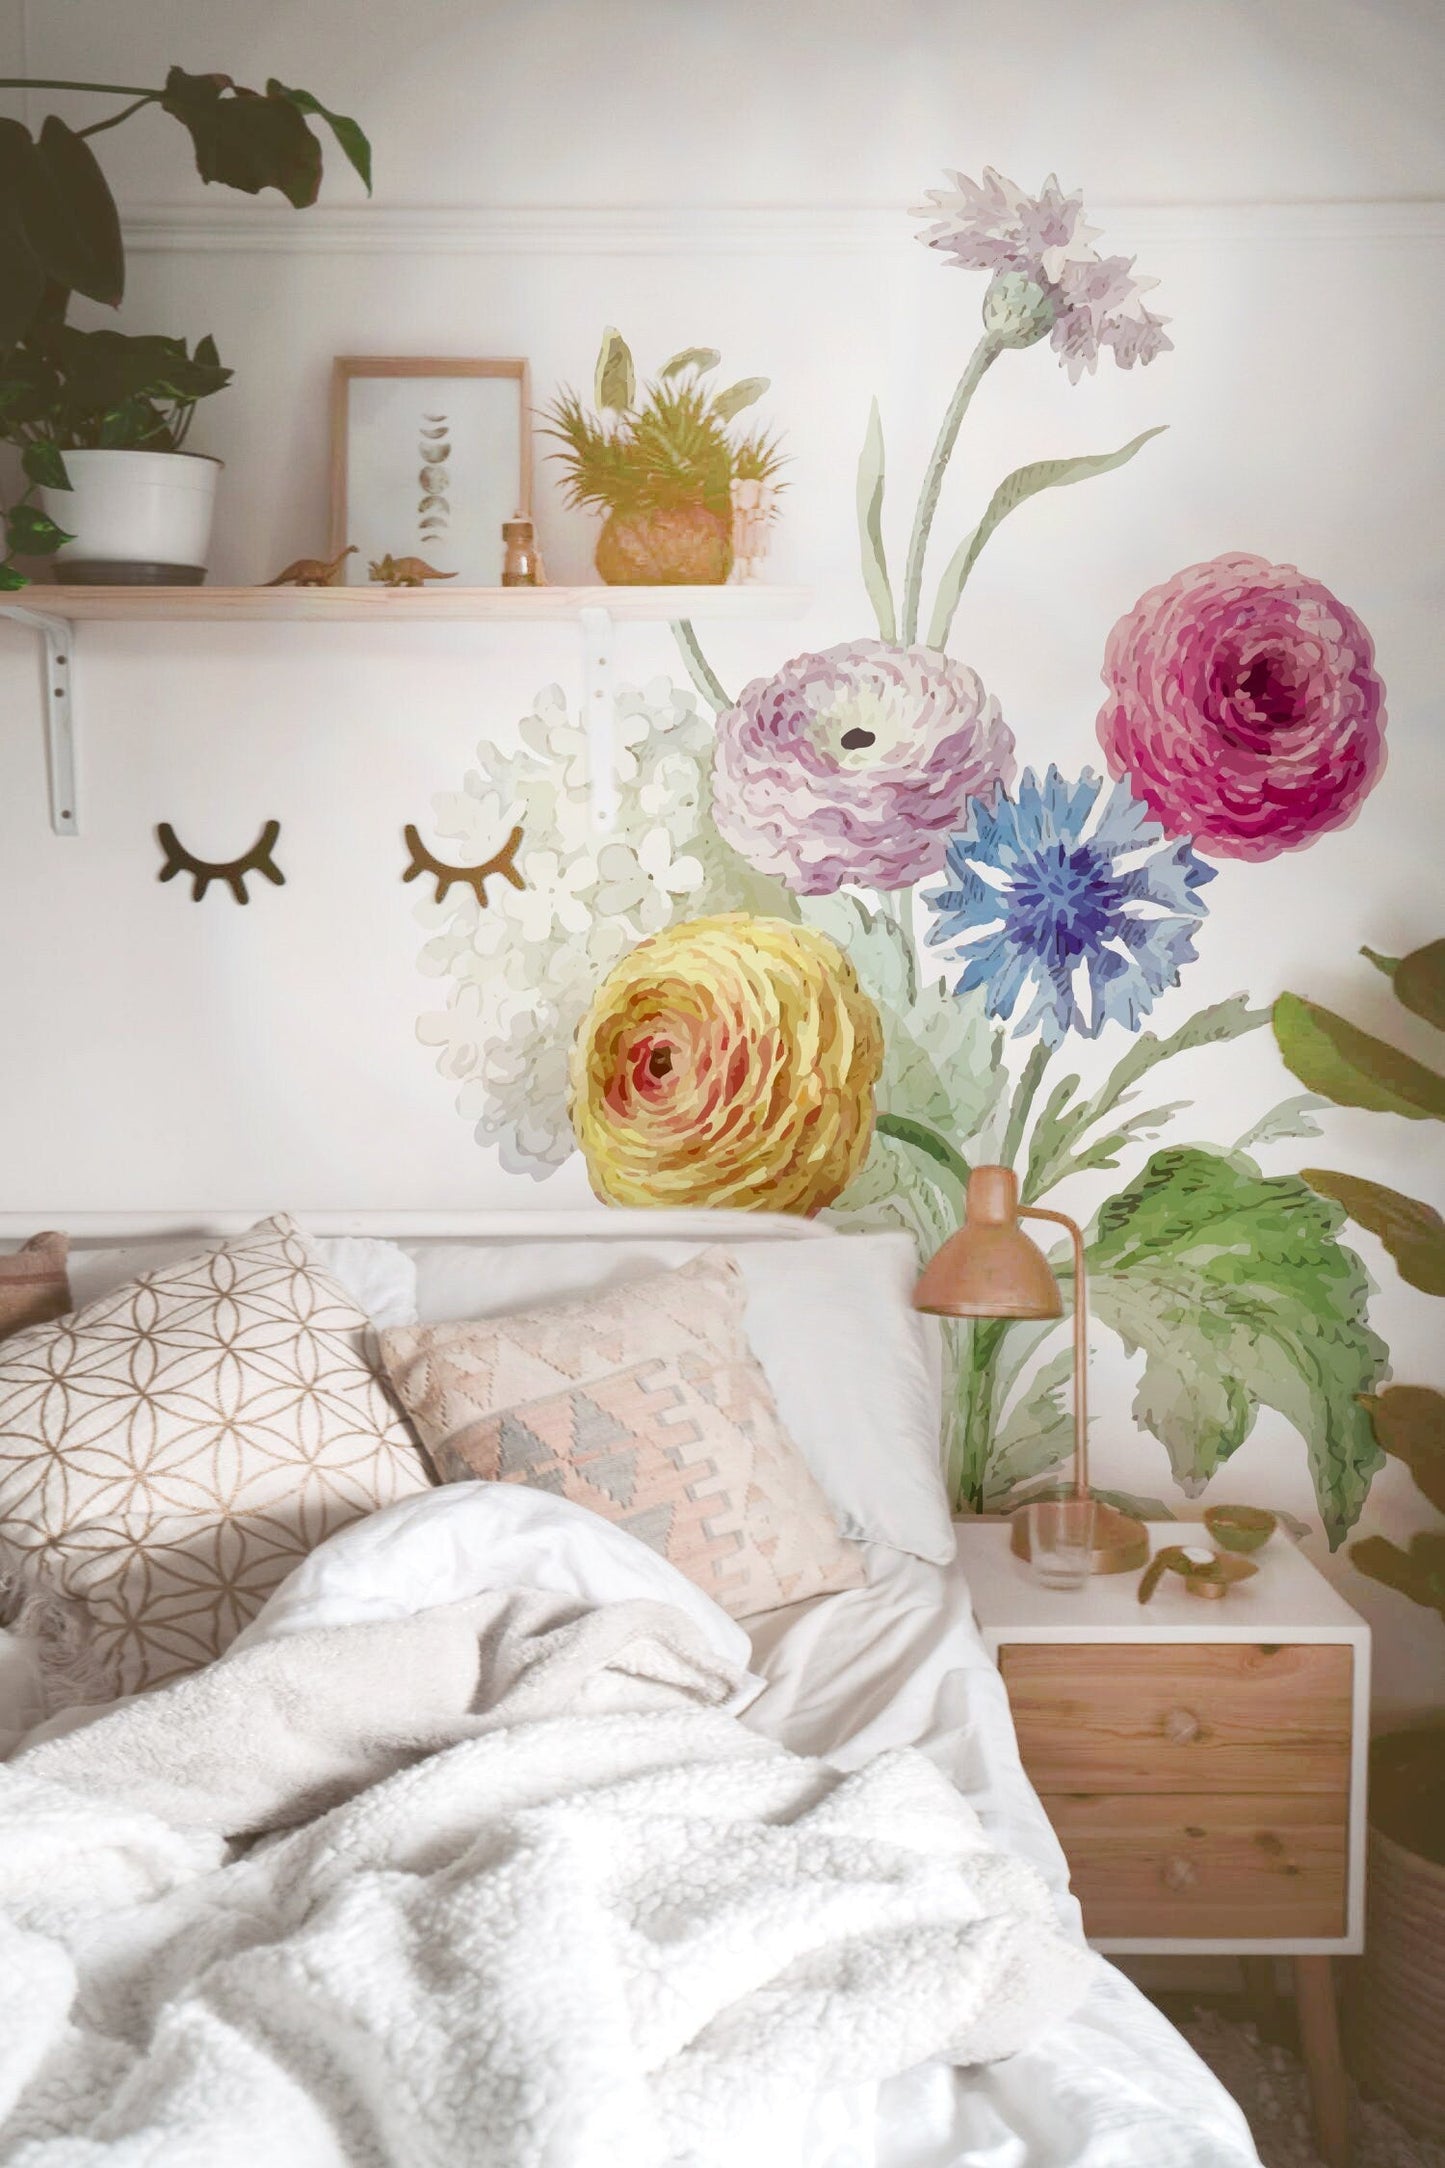 Flower wall Decal Greenery Stickers Colorful Floral, LF125